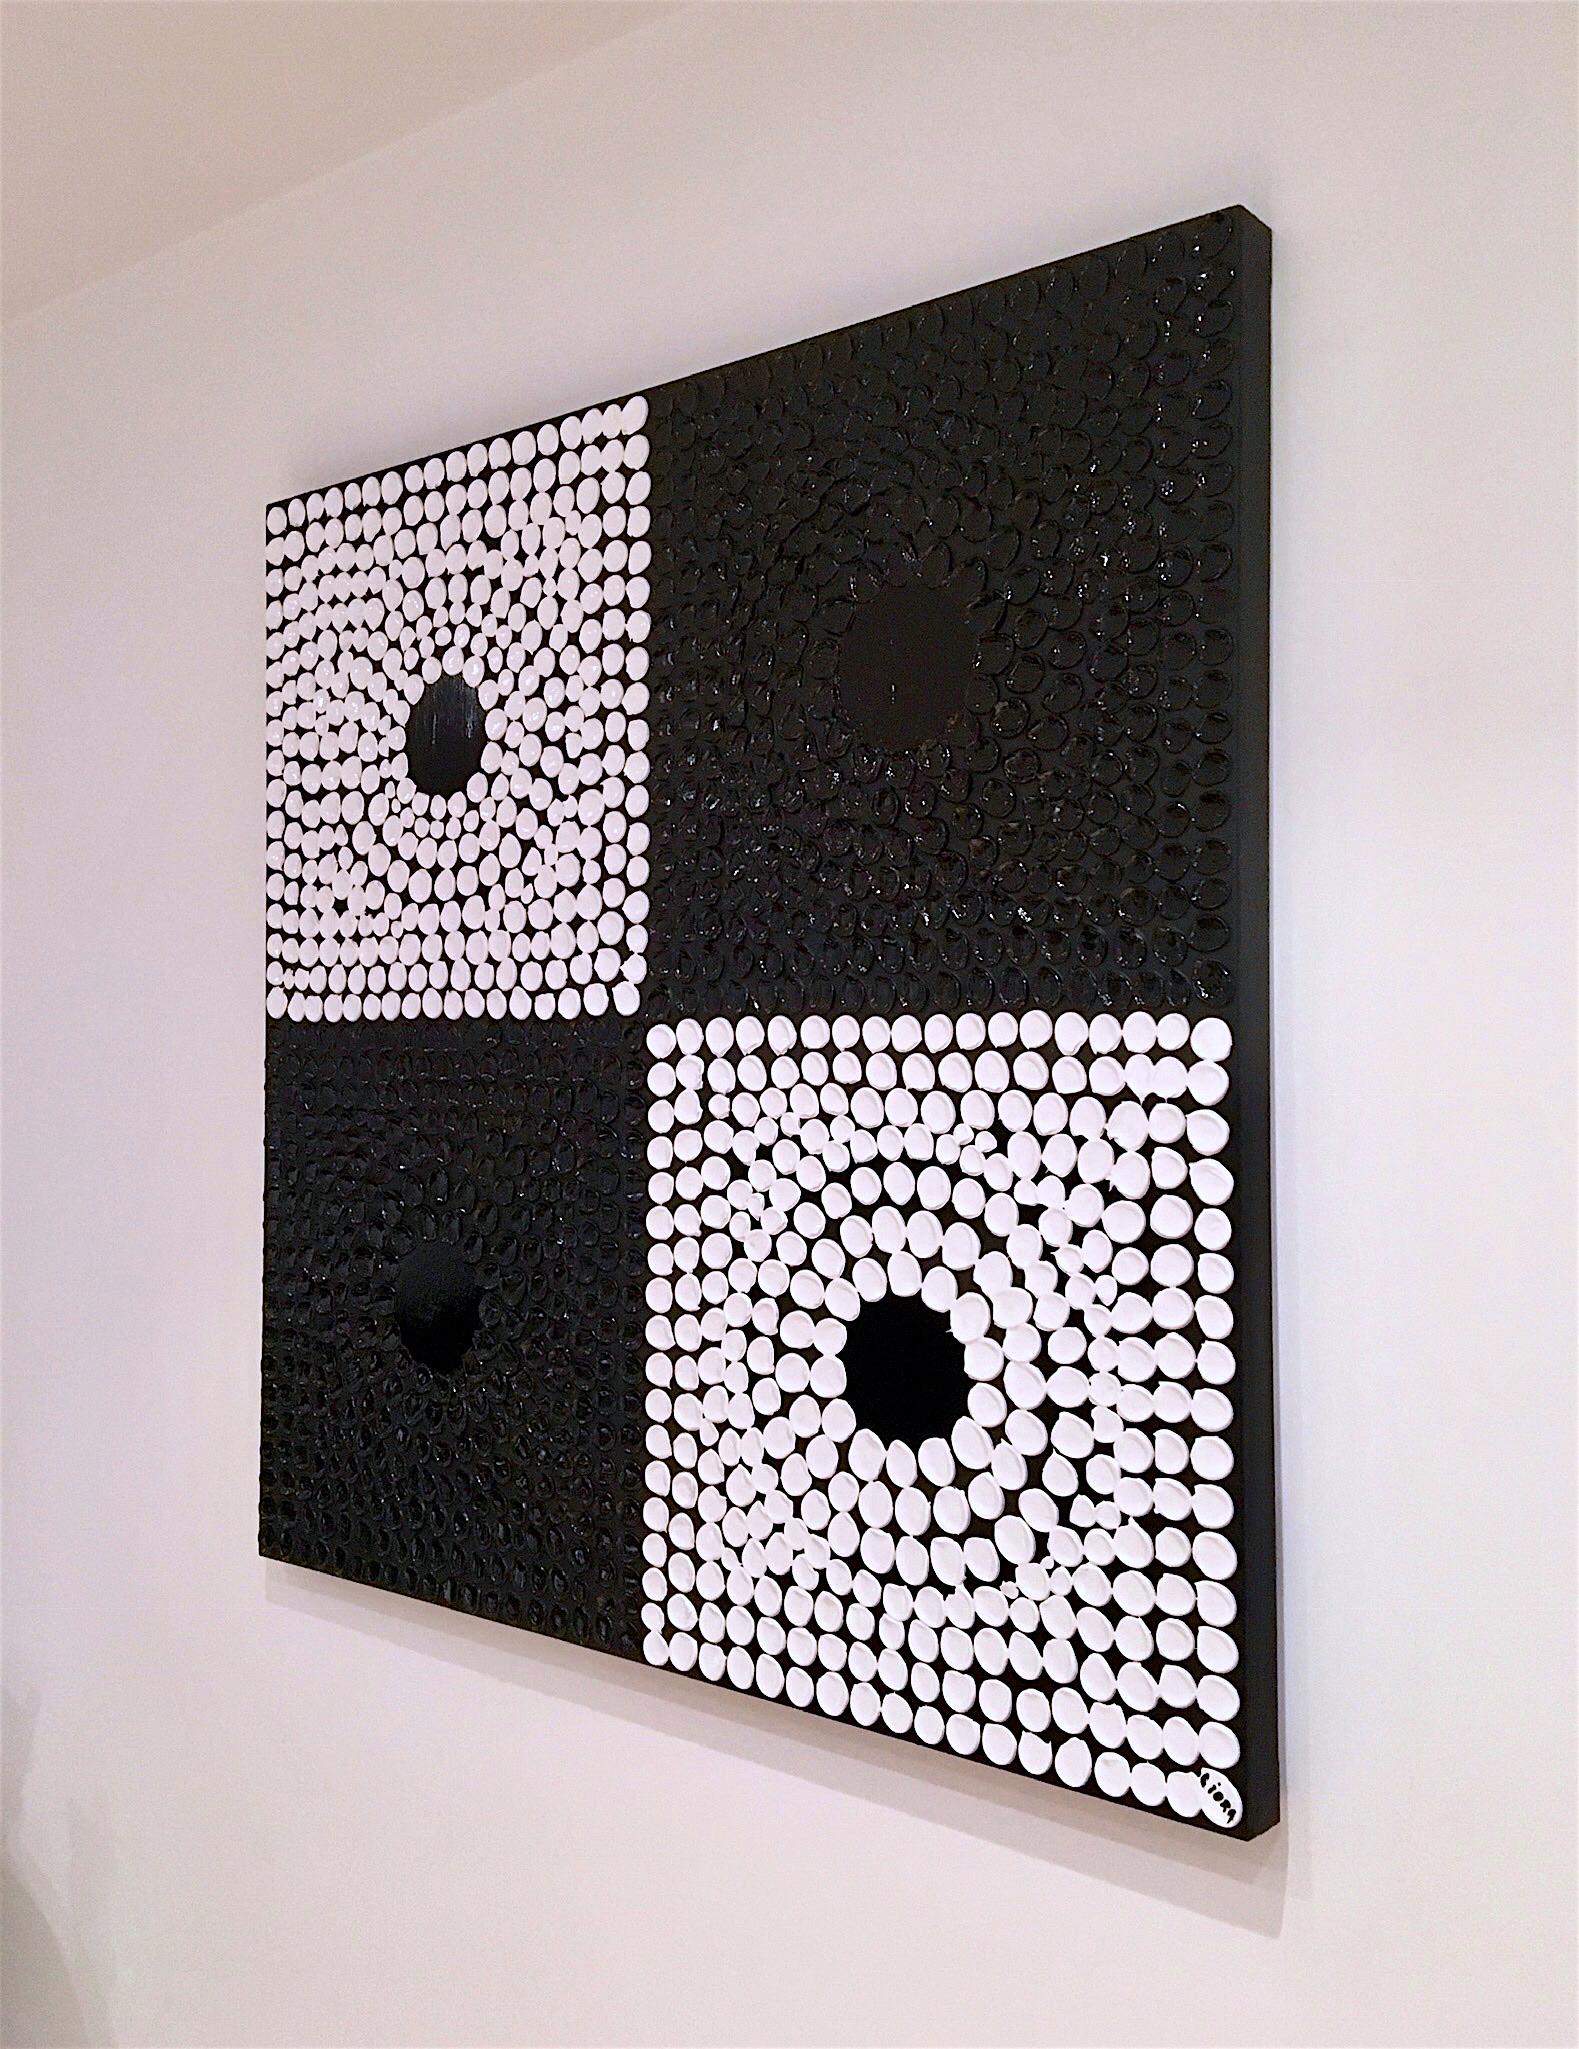 Painting Black Hole 9 by Liora Textured Black White Large Abstract Canvas Modern In New Condition For Sale In London, GB